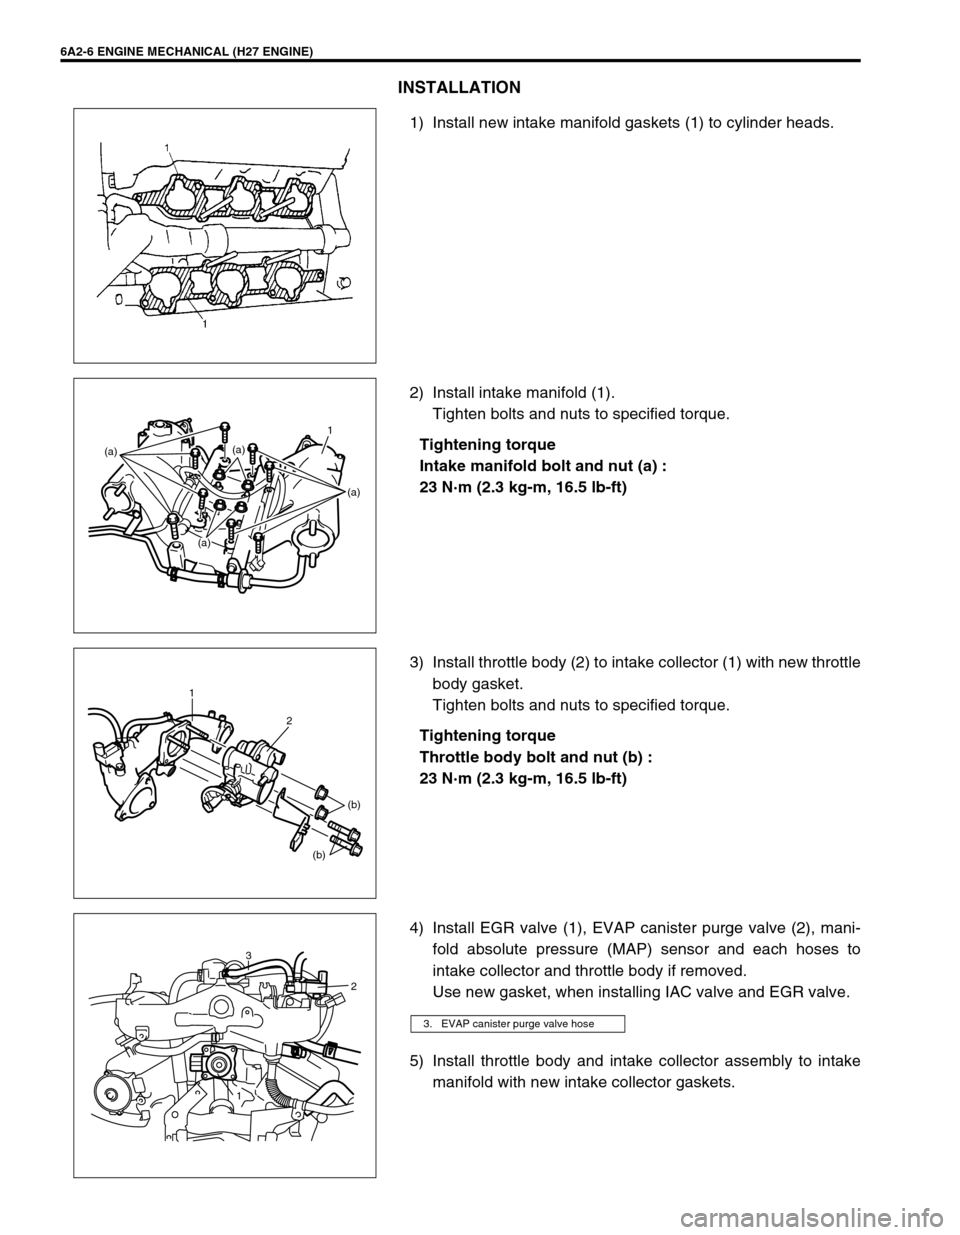 SUZUKI GRAND VITARA 2001 2.G Owners Manual 6A2-6 ENGINE MECHANICAL (H27 ENGINE)
INSTALLATION
1) Install new intake manifold gaskets (1) to cylinder heads.
2) Install intake manifold (1).
Tighten bolts and nuts to specified torque.
Tightening t